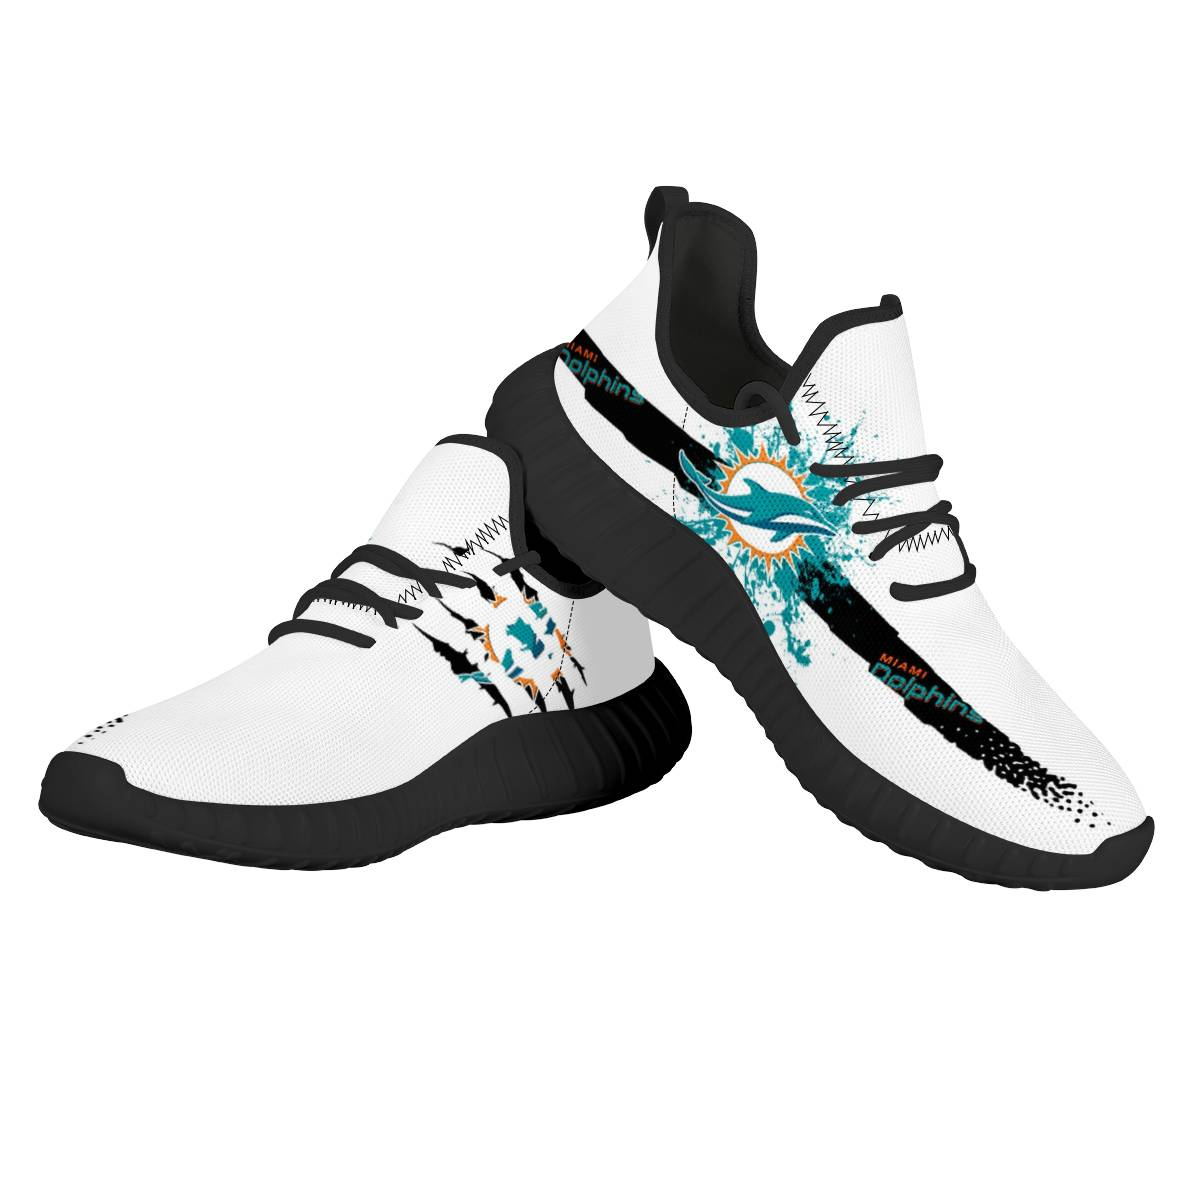 Men's Miami Dolphins Mesh Knit Sneakers/Shoes 007